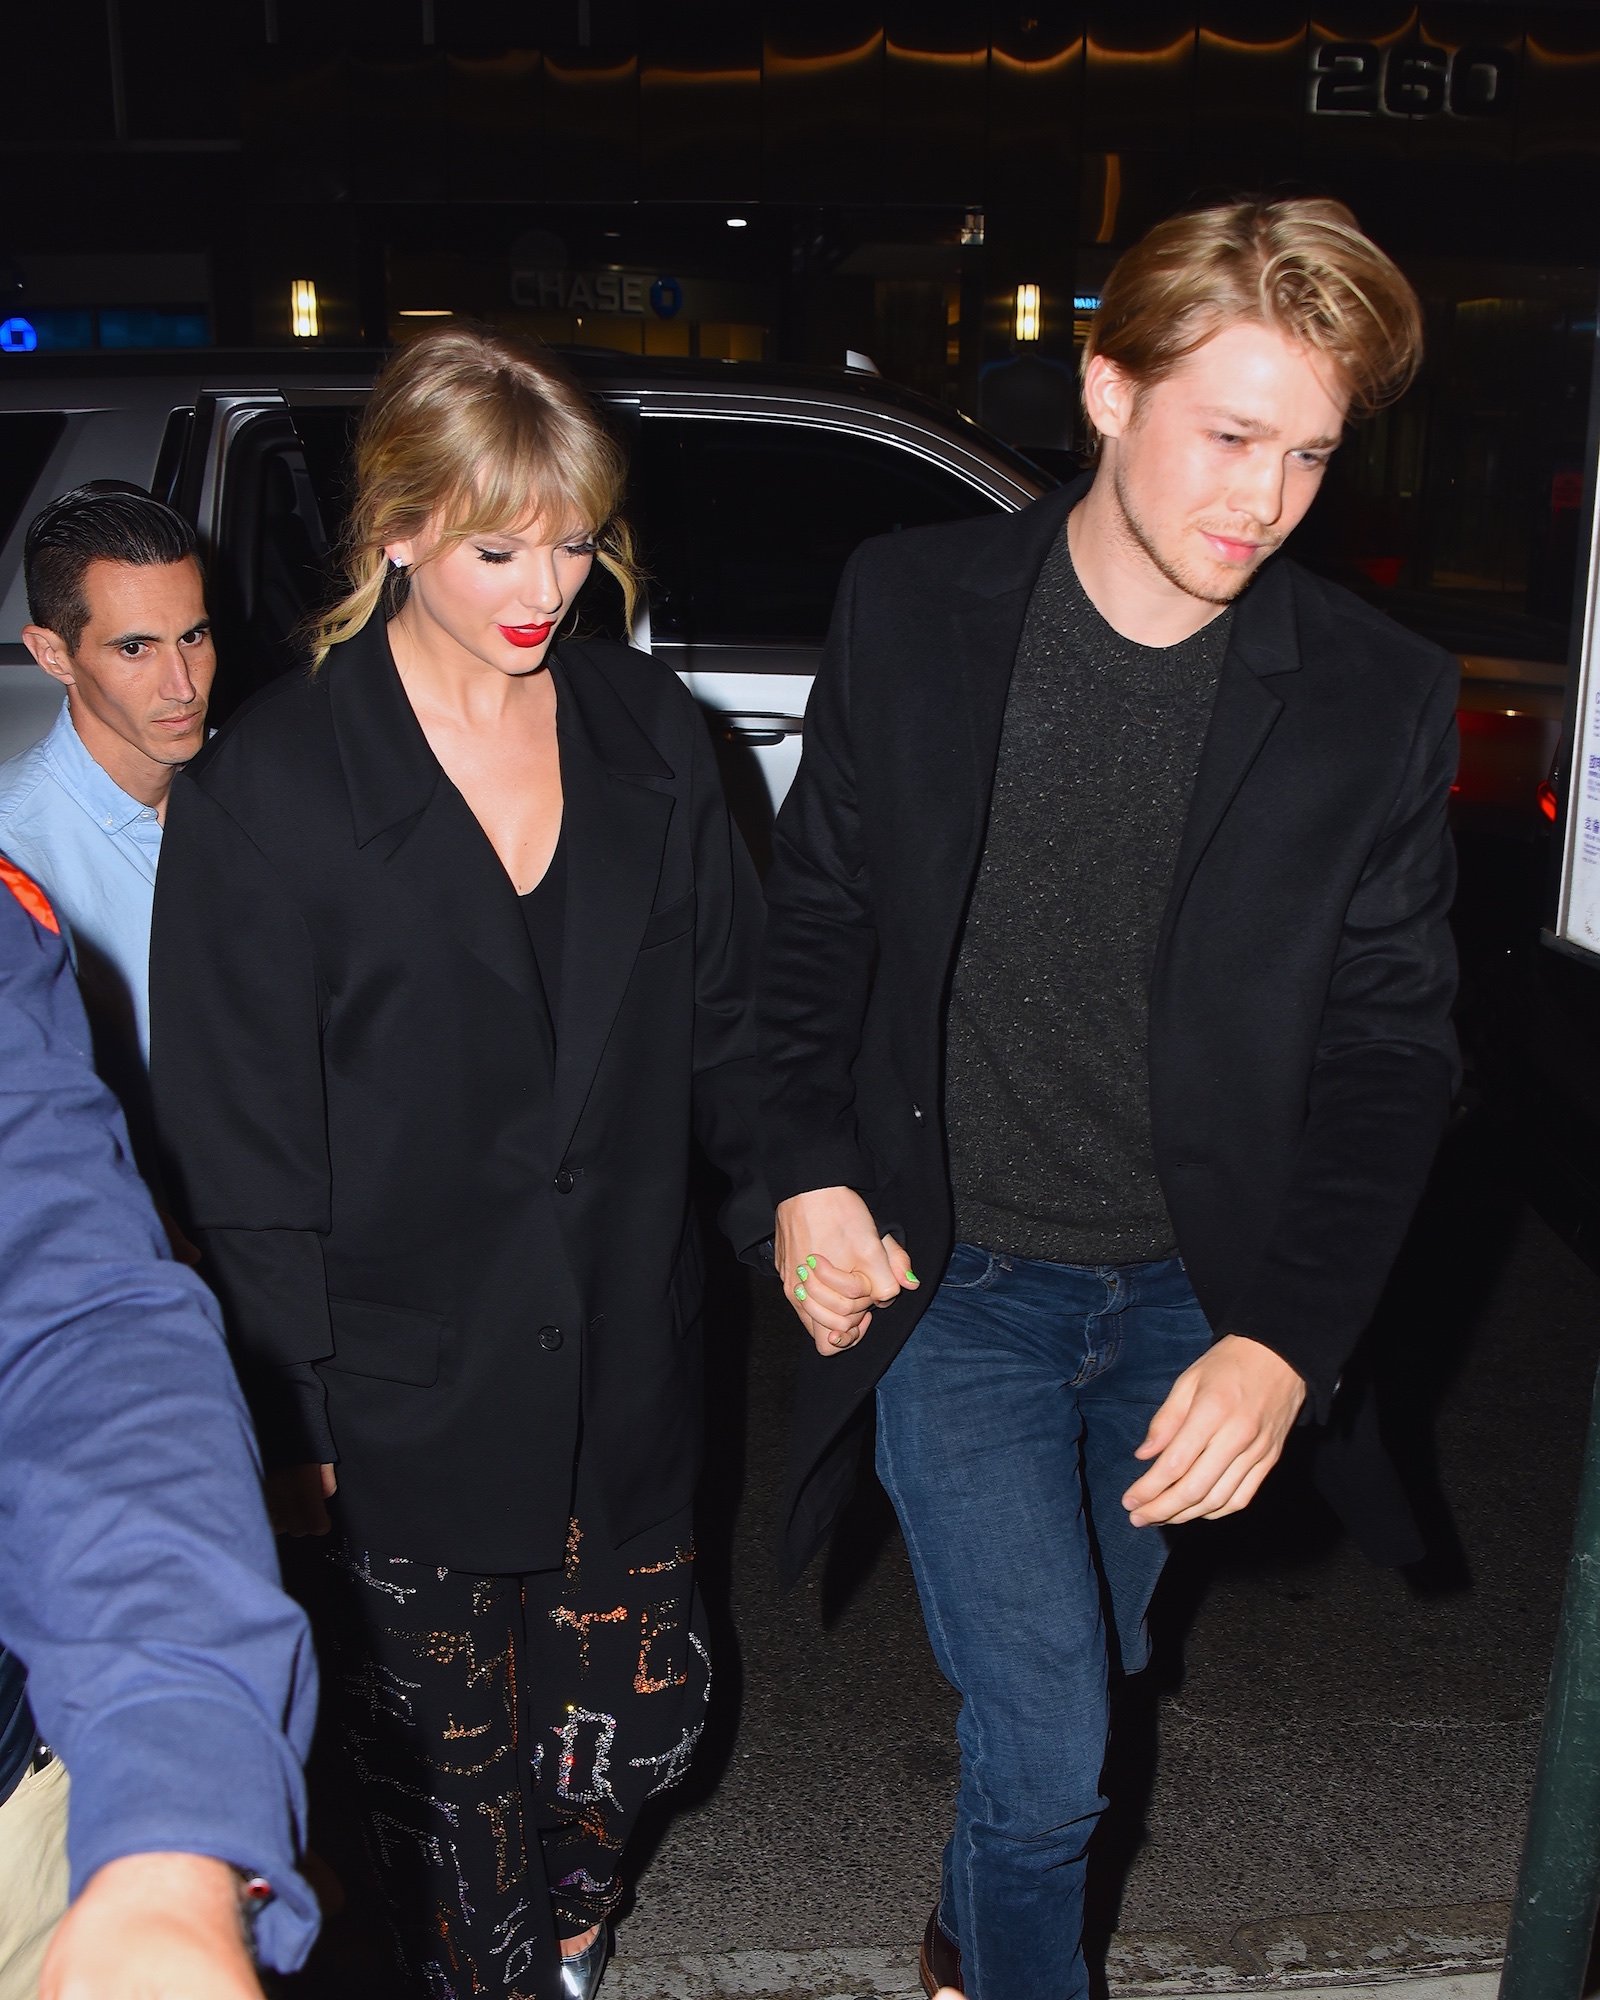 Taylor Swift and Joe Alwyn holding hands while walking in New York City 